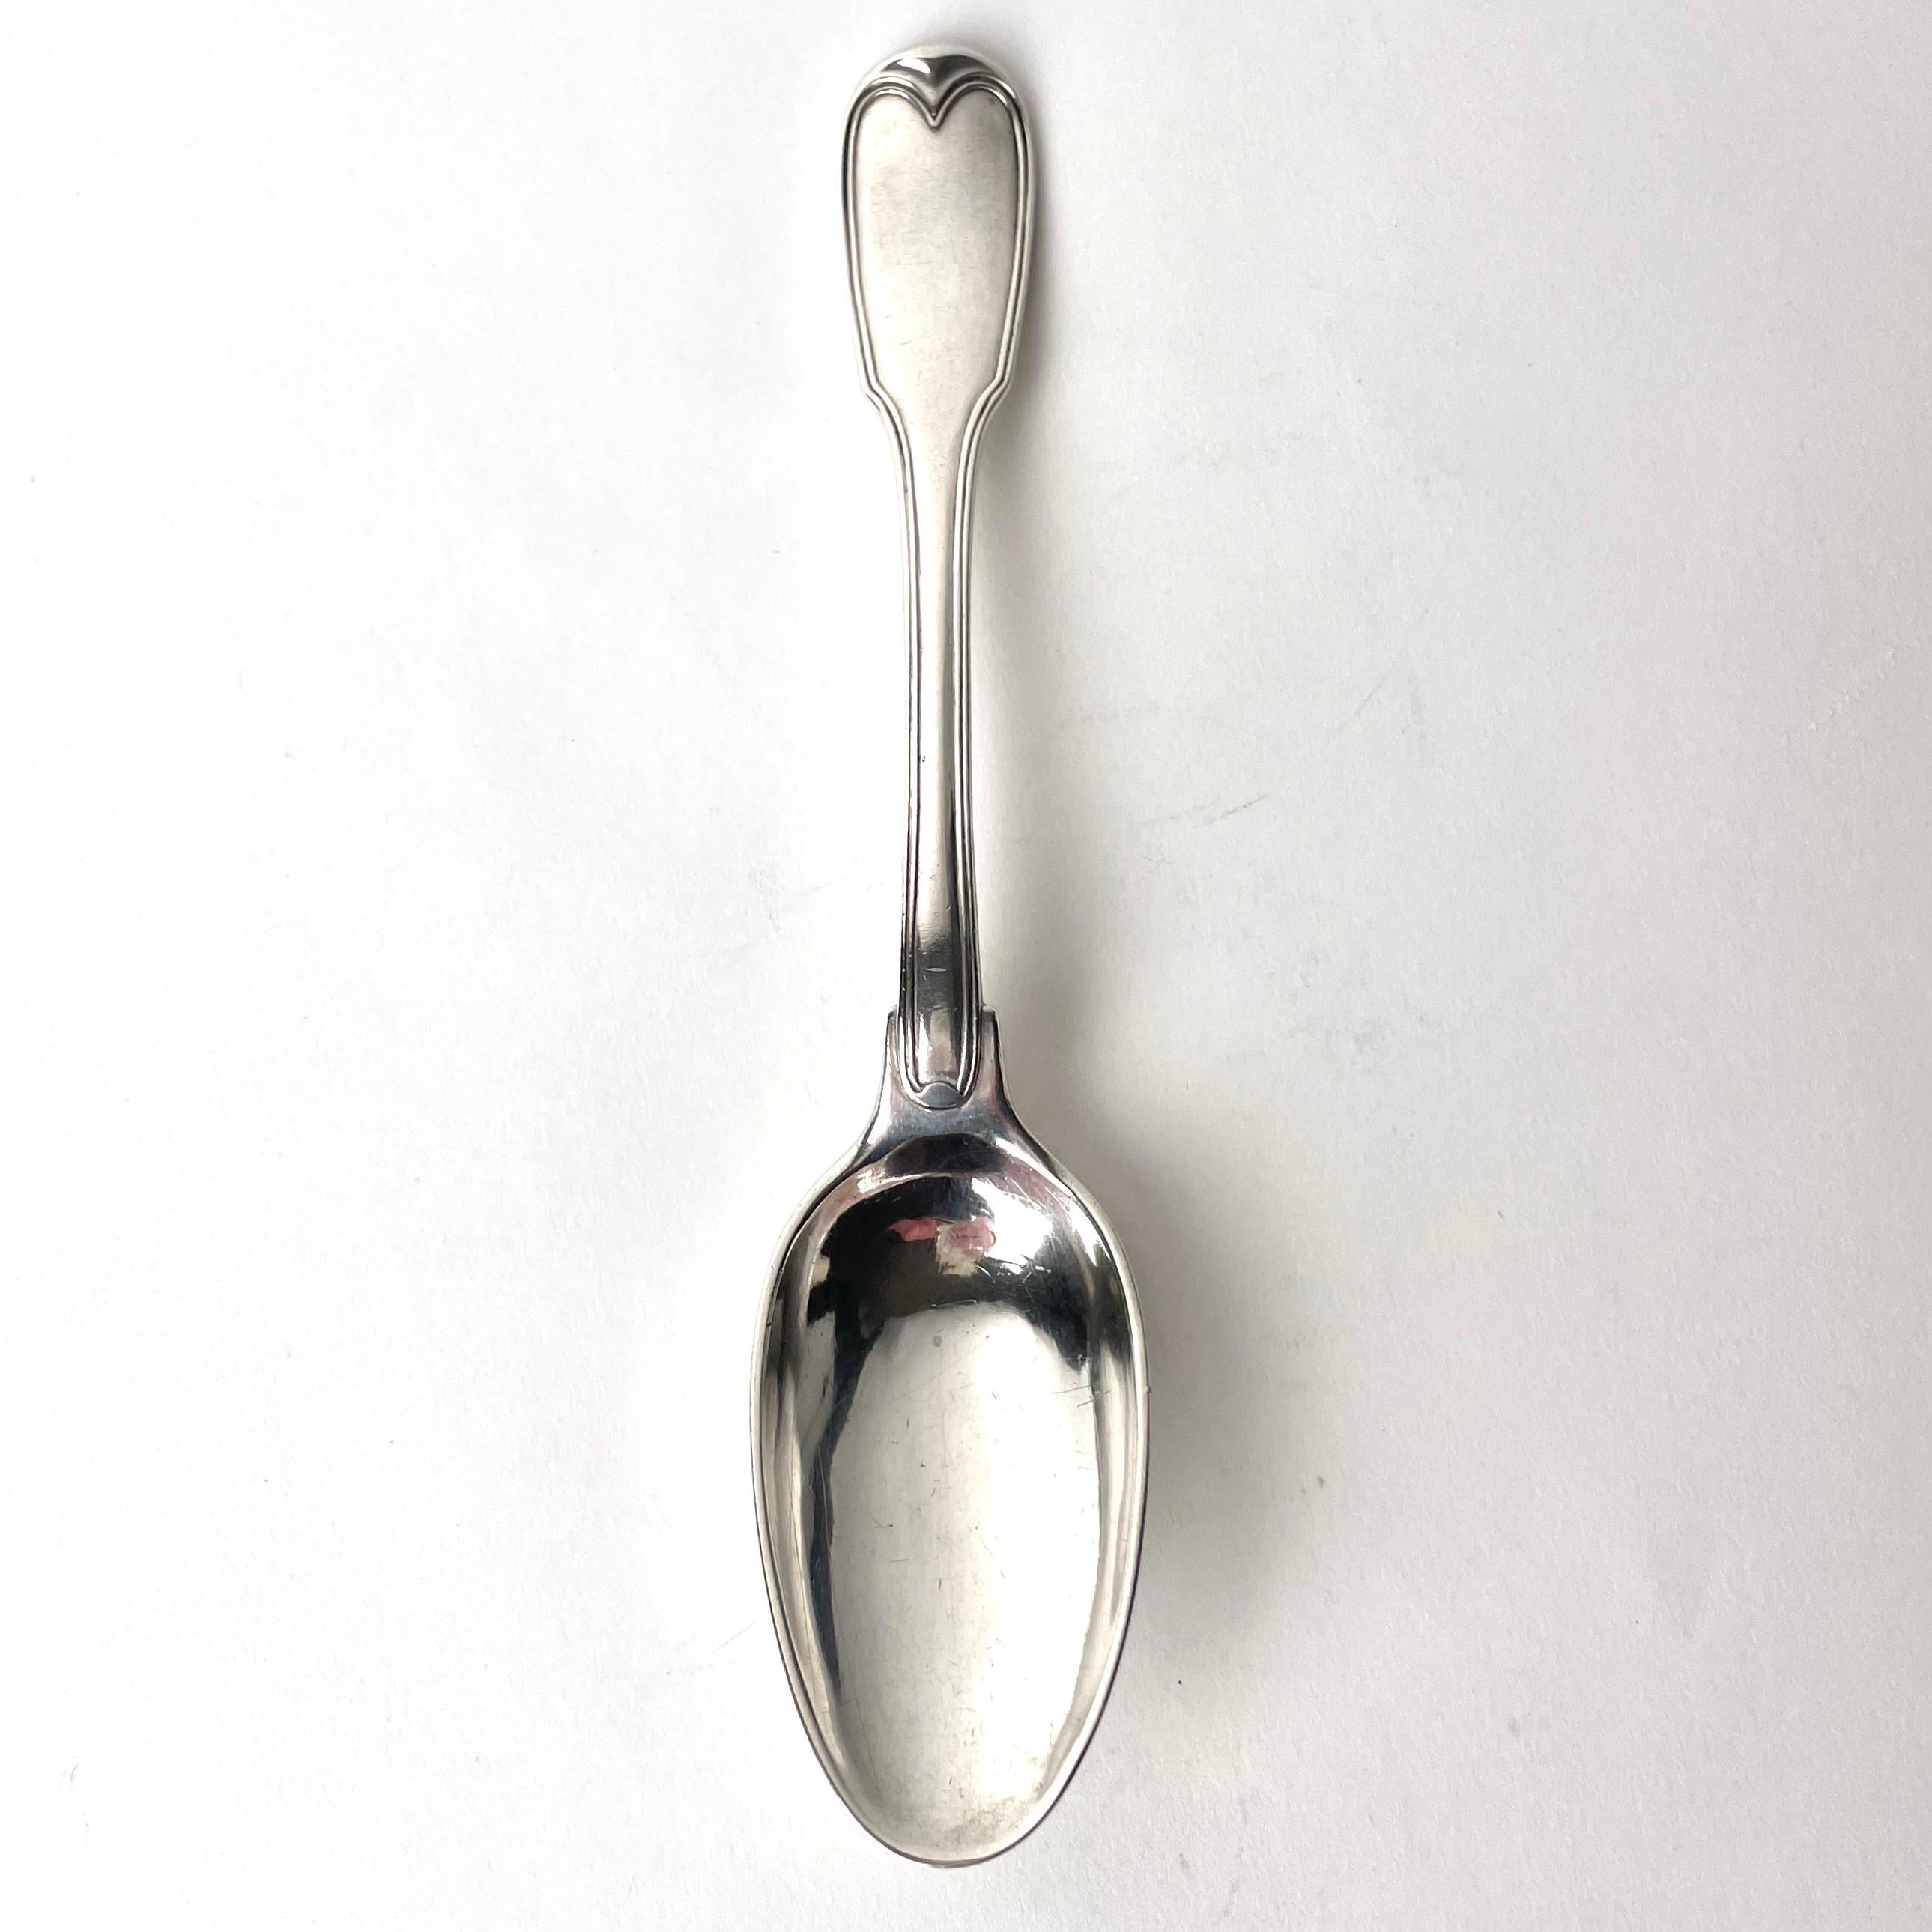 Gustavian silver spoon by Arvid Floberg (1730-1804), Stockholm, Sweden dated 1785(C2) with baronial coat of arms. Rare and of extremely high quality. Simple beauty.

Wear consistent with age and use.